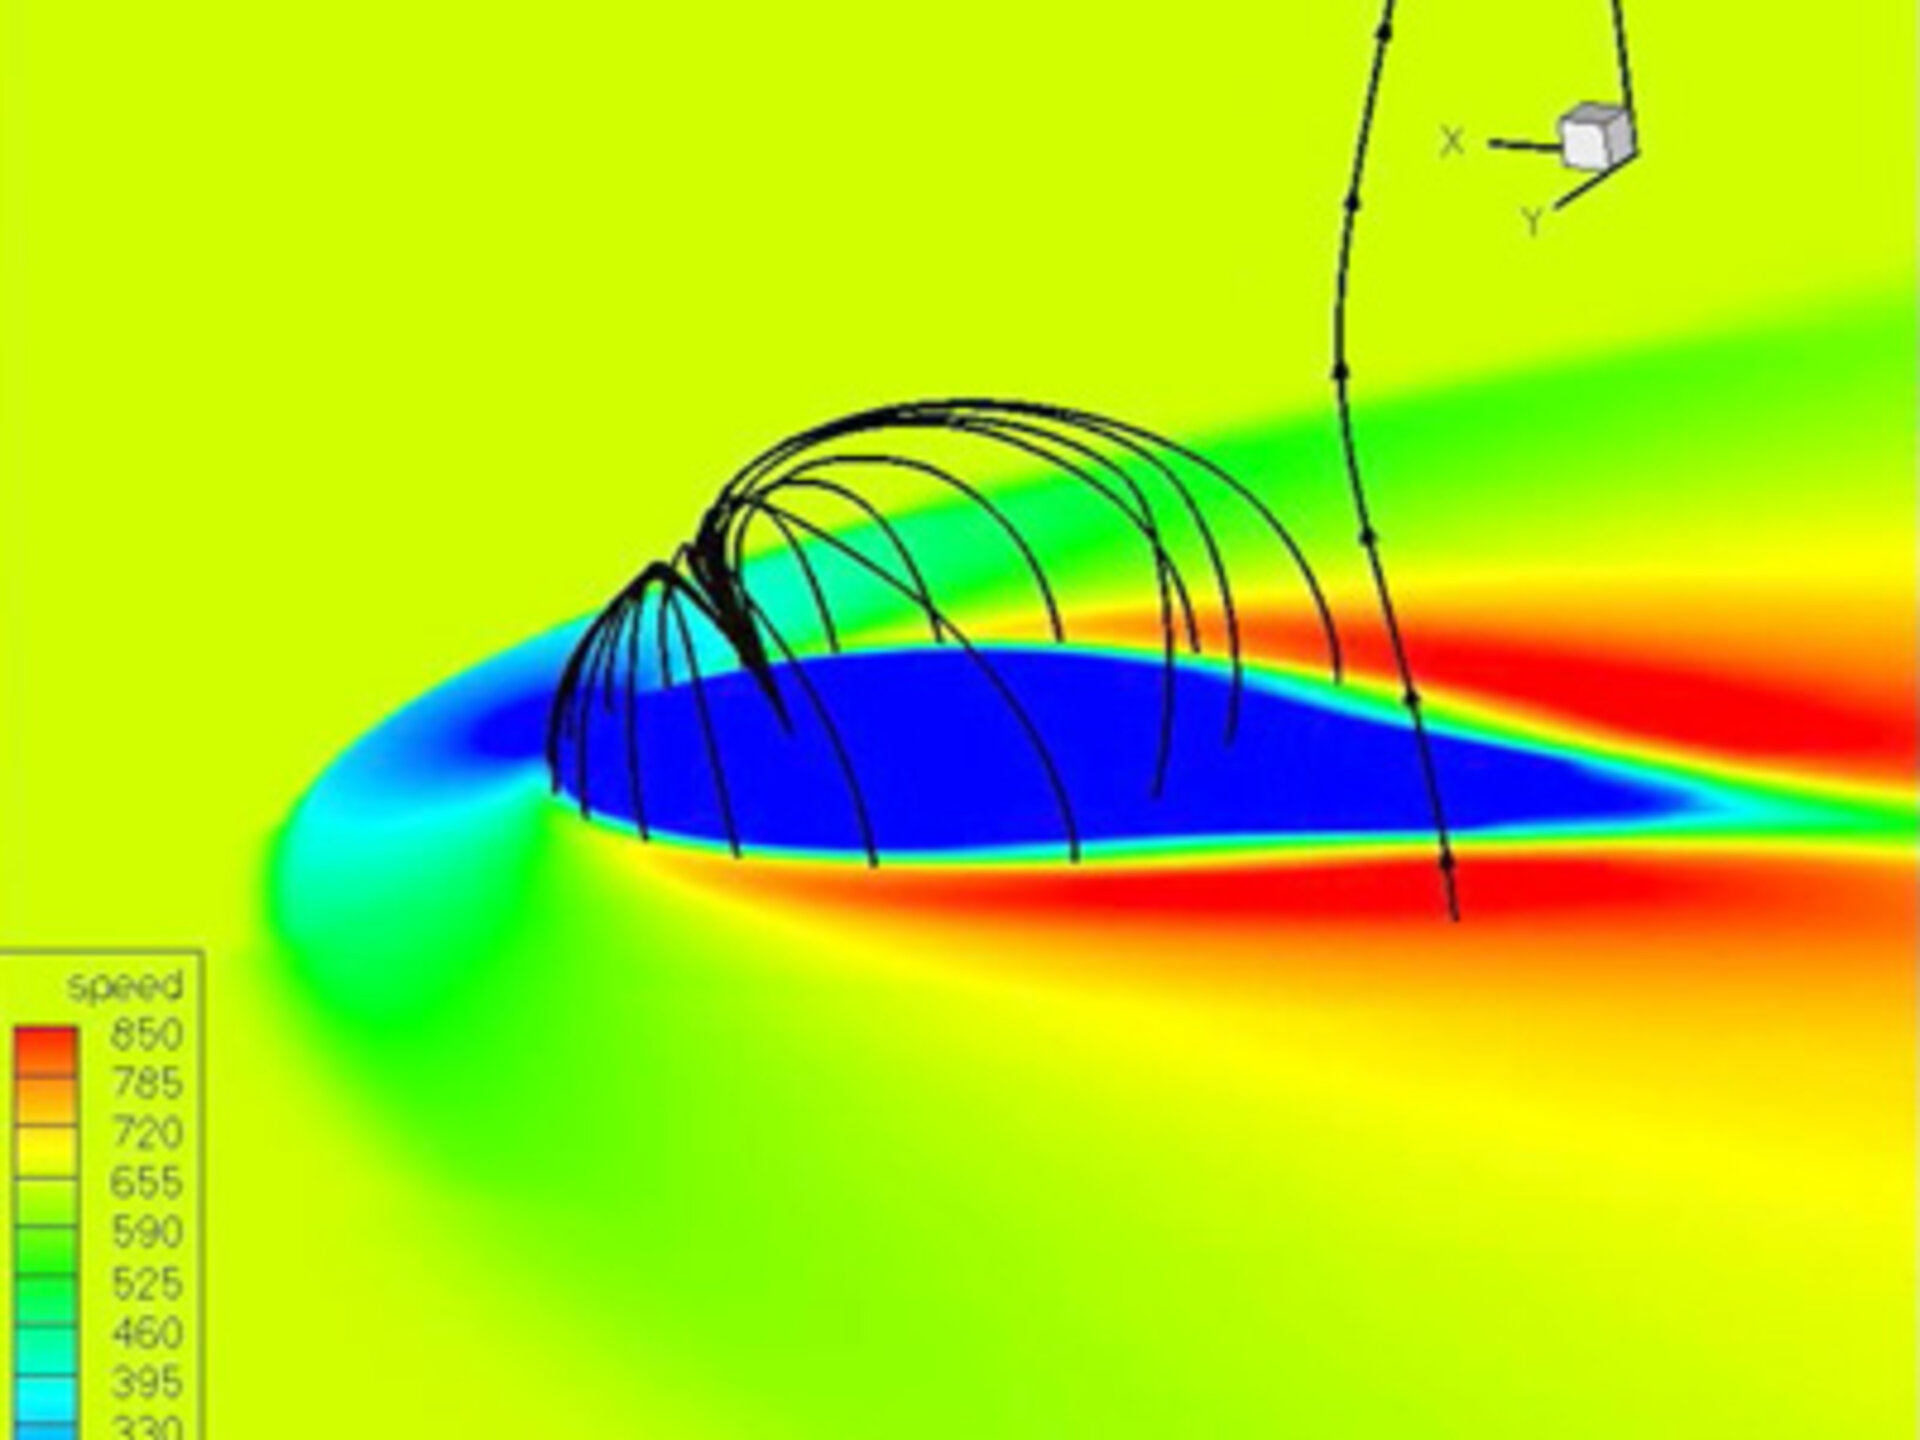 Simulation of the magnetosphere